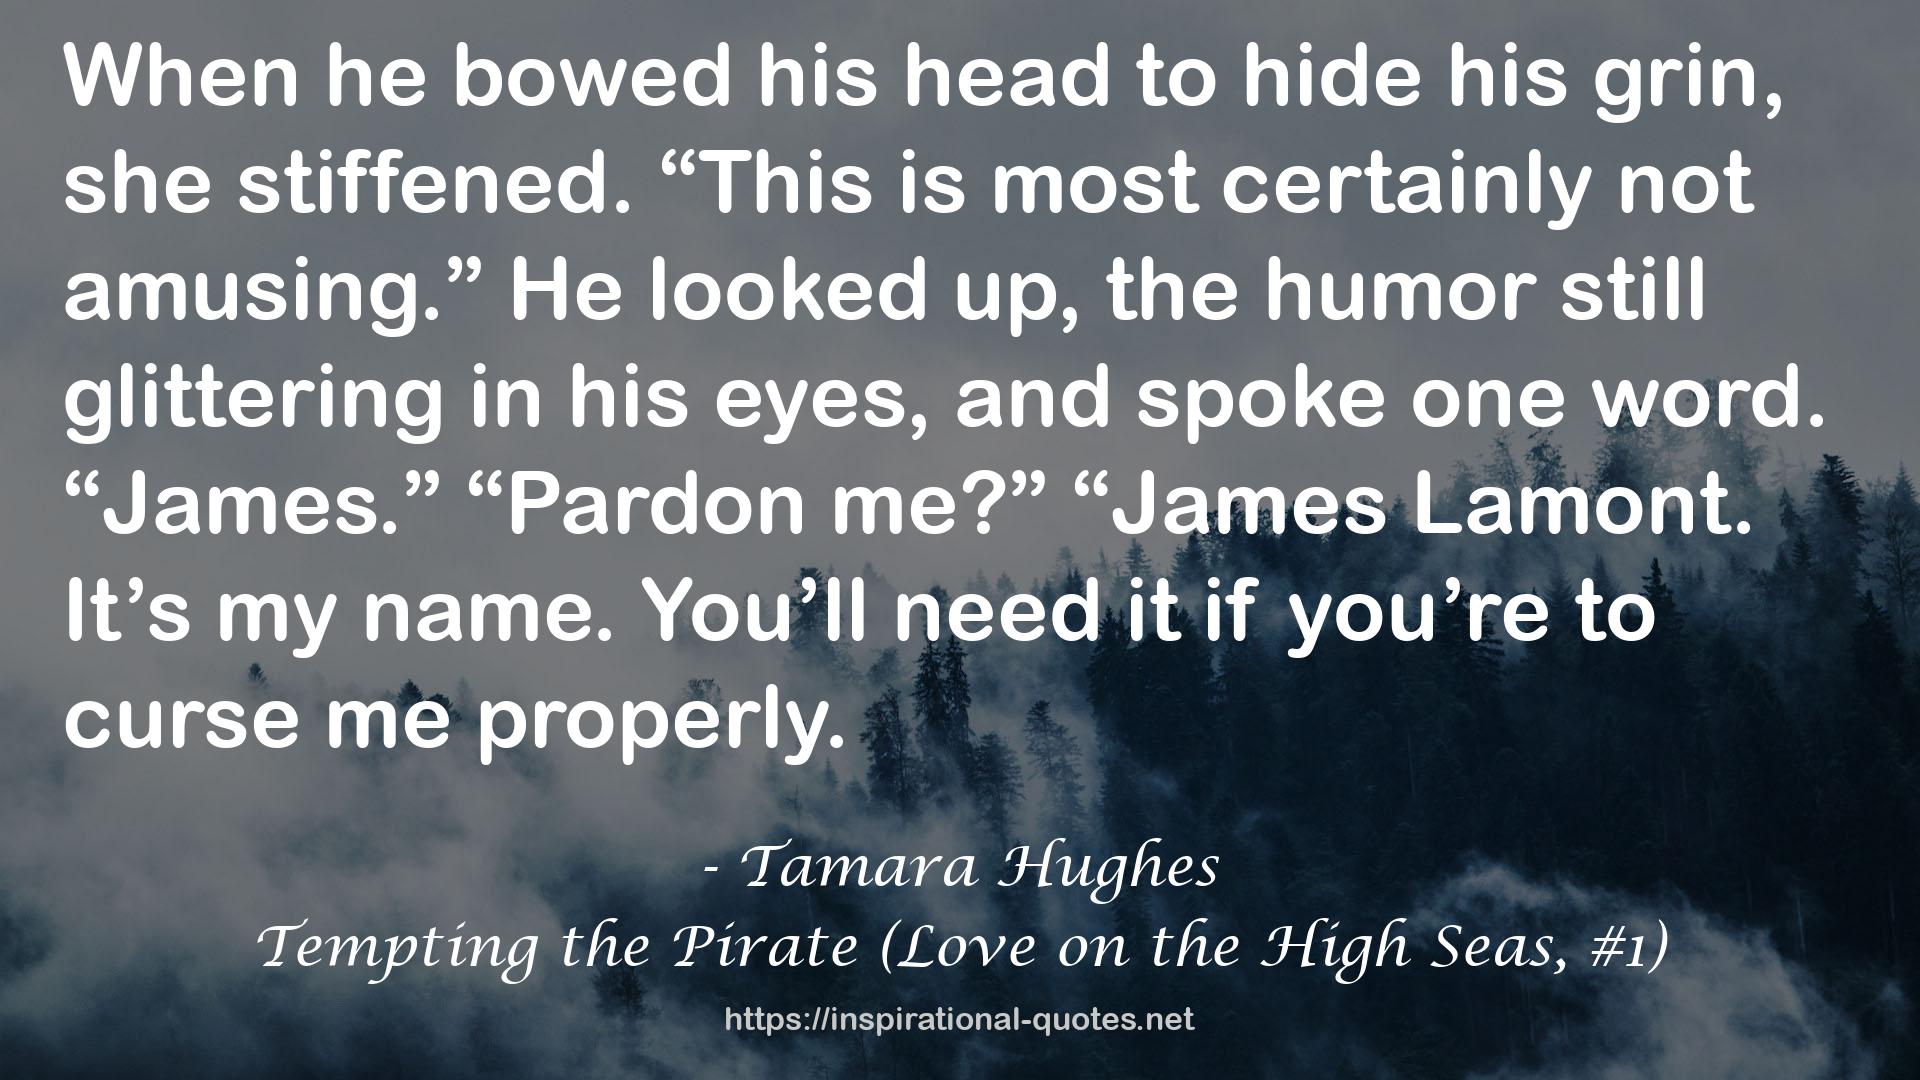 Tempting the Pirate (Love on the High Seas, #1) QUOTES